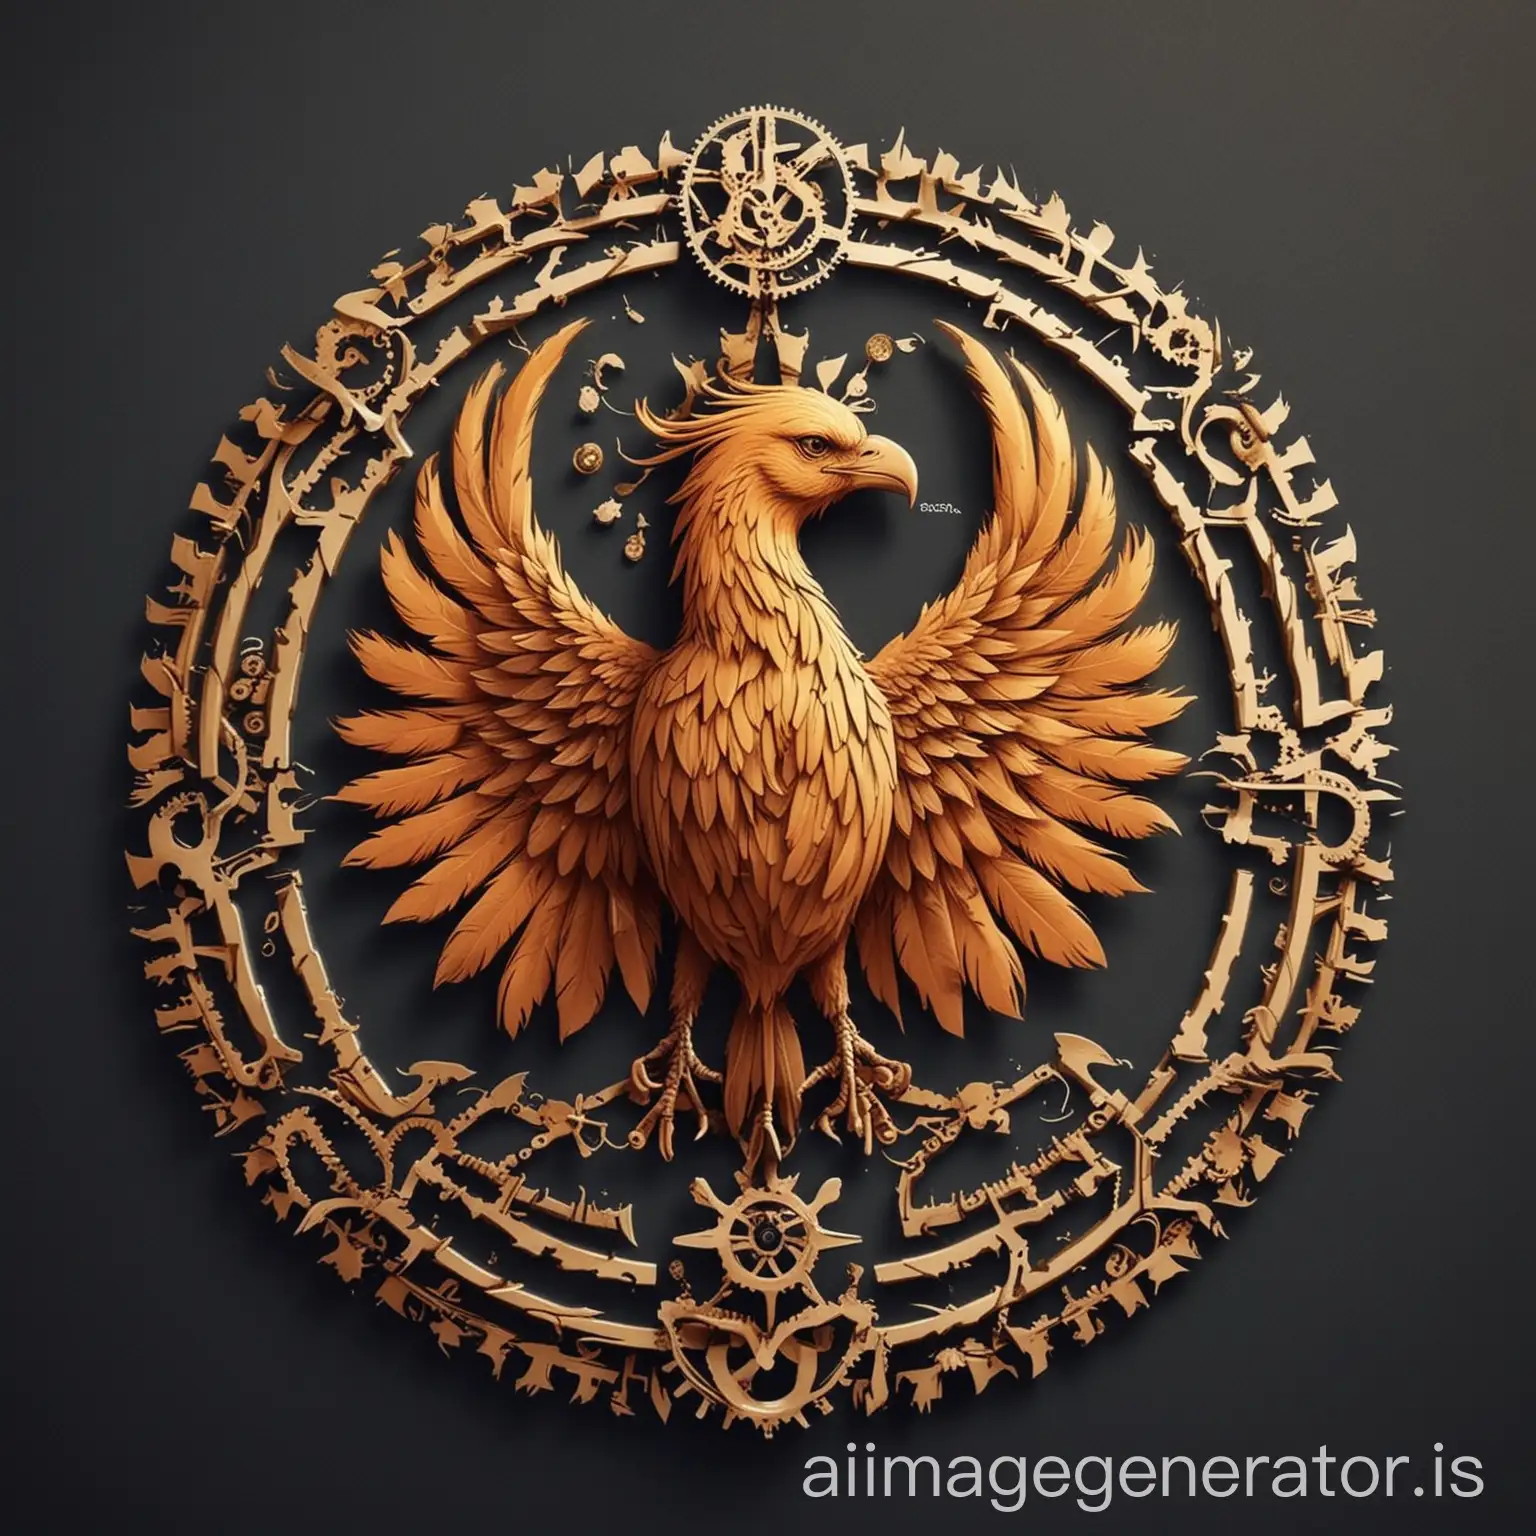 Circular-Logo-Design-Islamic-Scientific-and-Technical-Symbols-with-Phoenix-Feathers-and-Gears